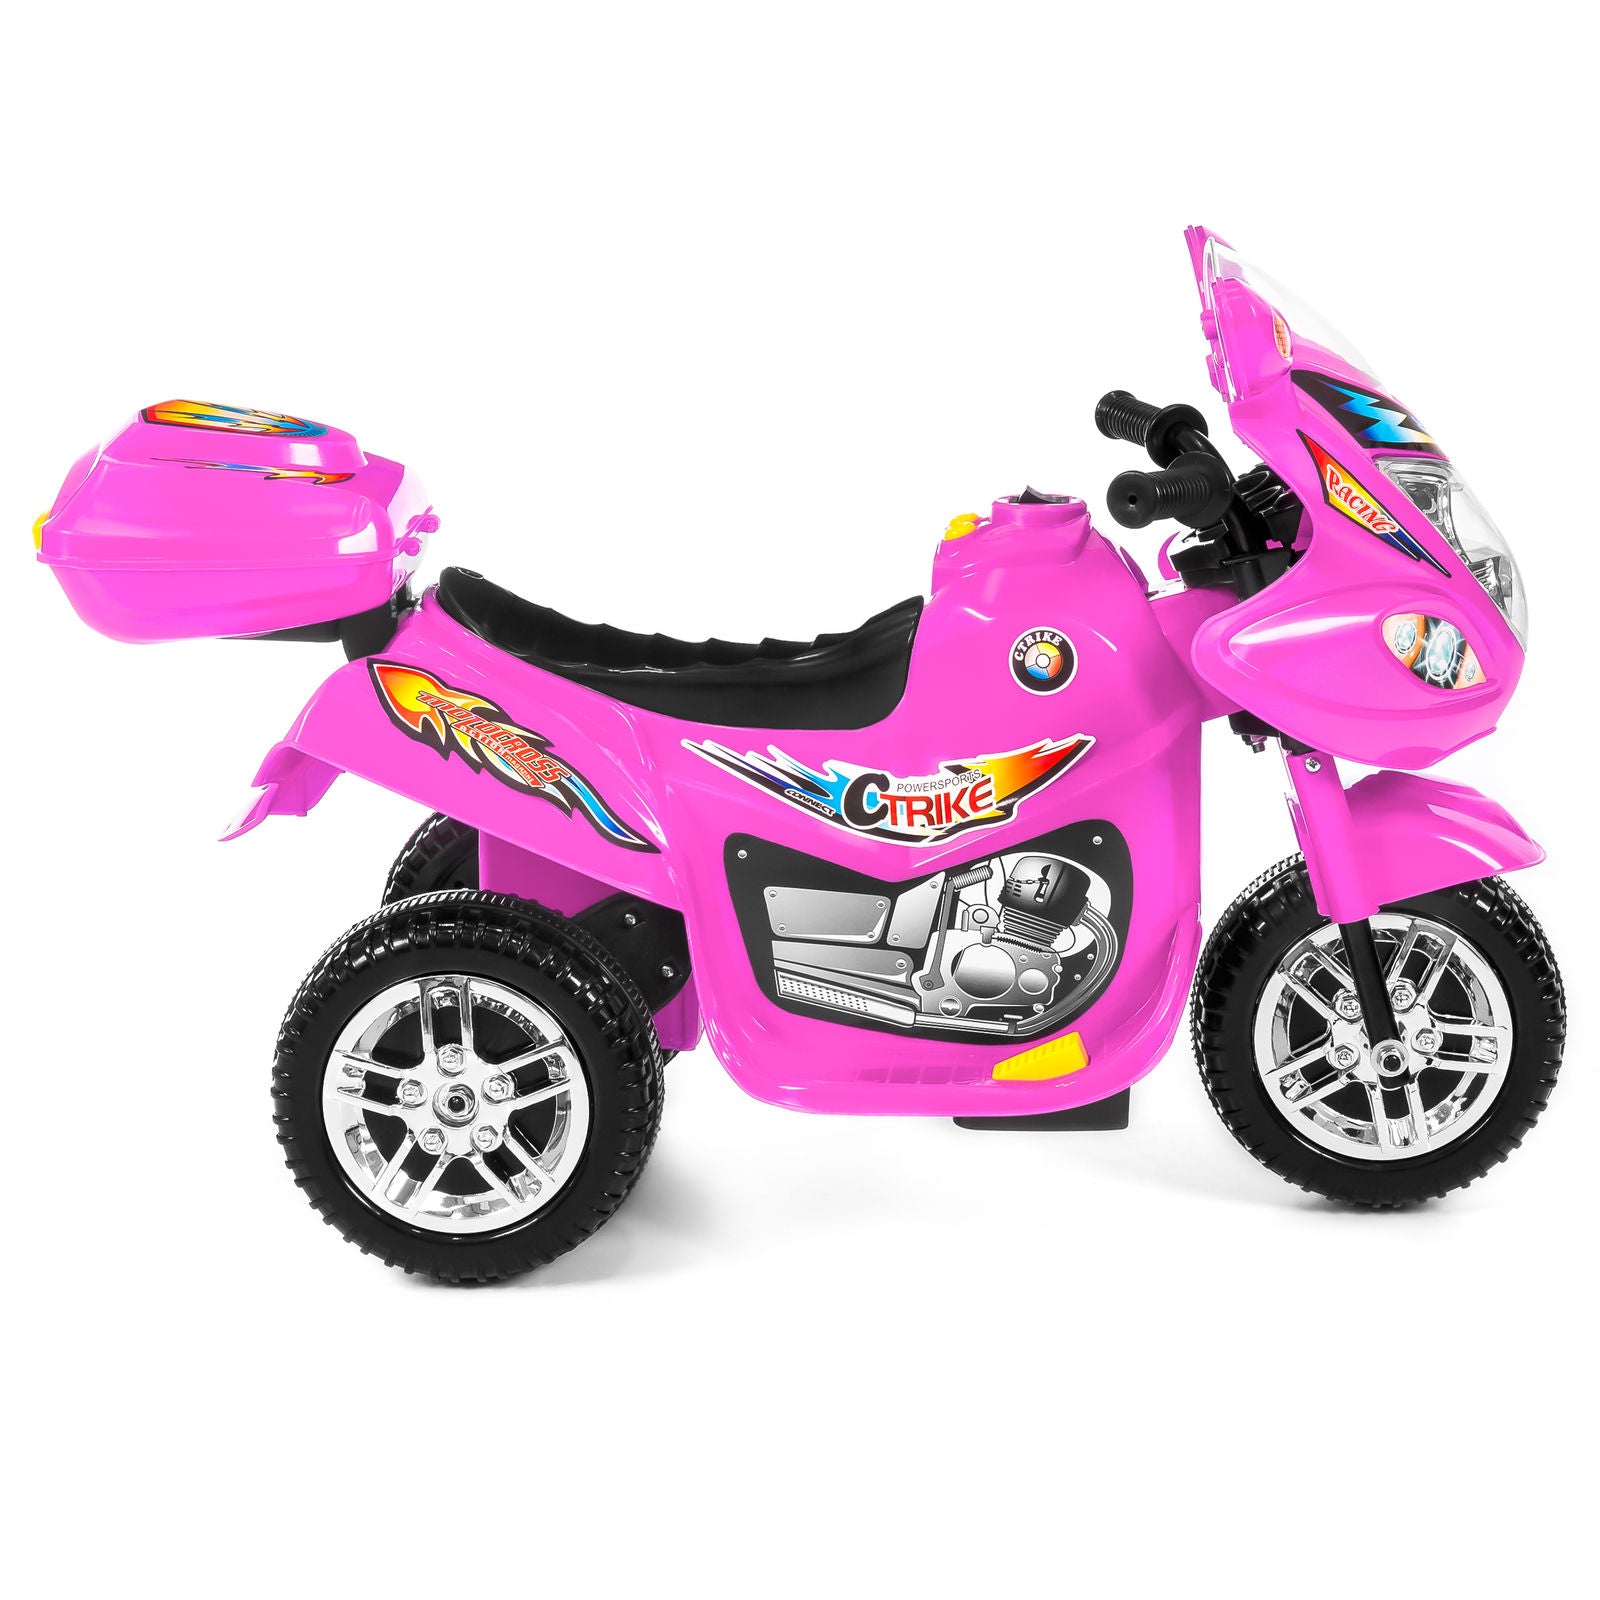 Cool Ride  3-Wheel Motorcycle For Kids - LIGHTS, MUSIC, HORN, STORAGE.